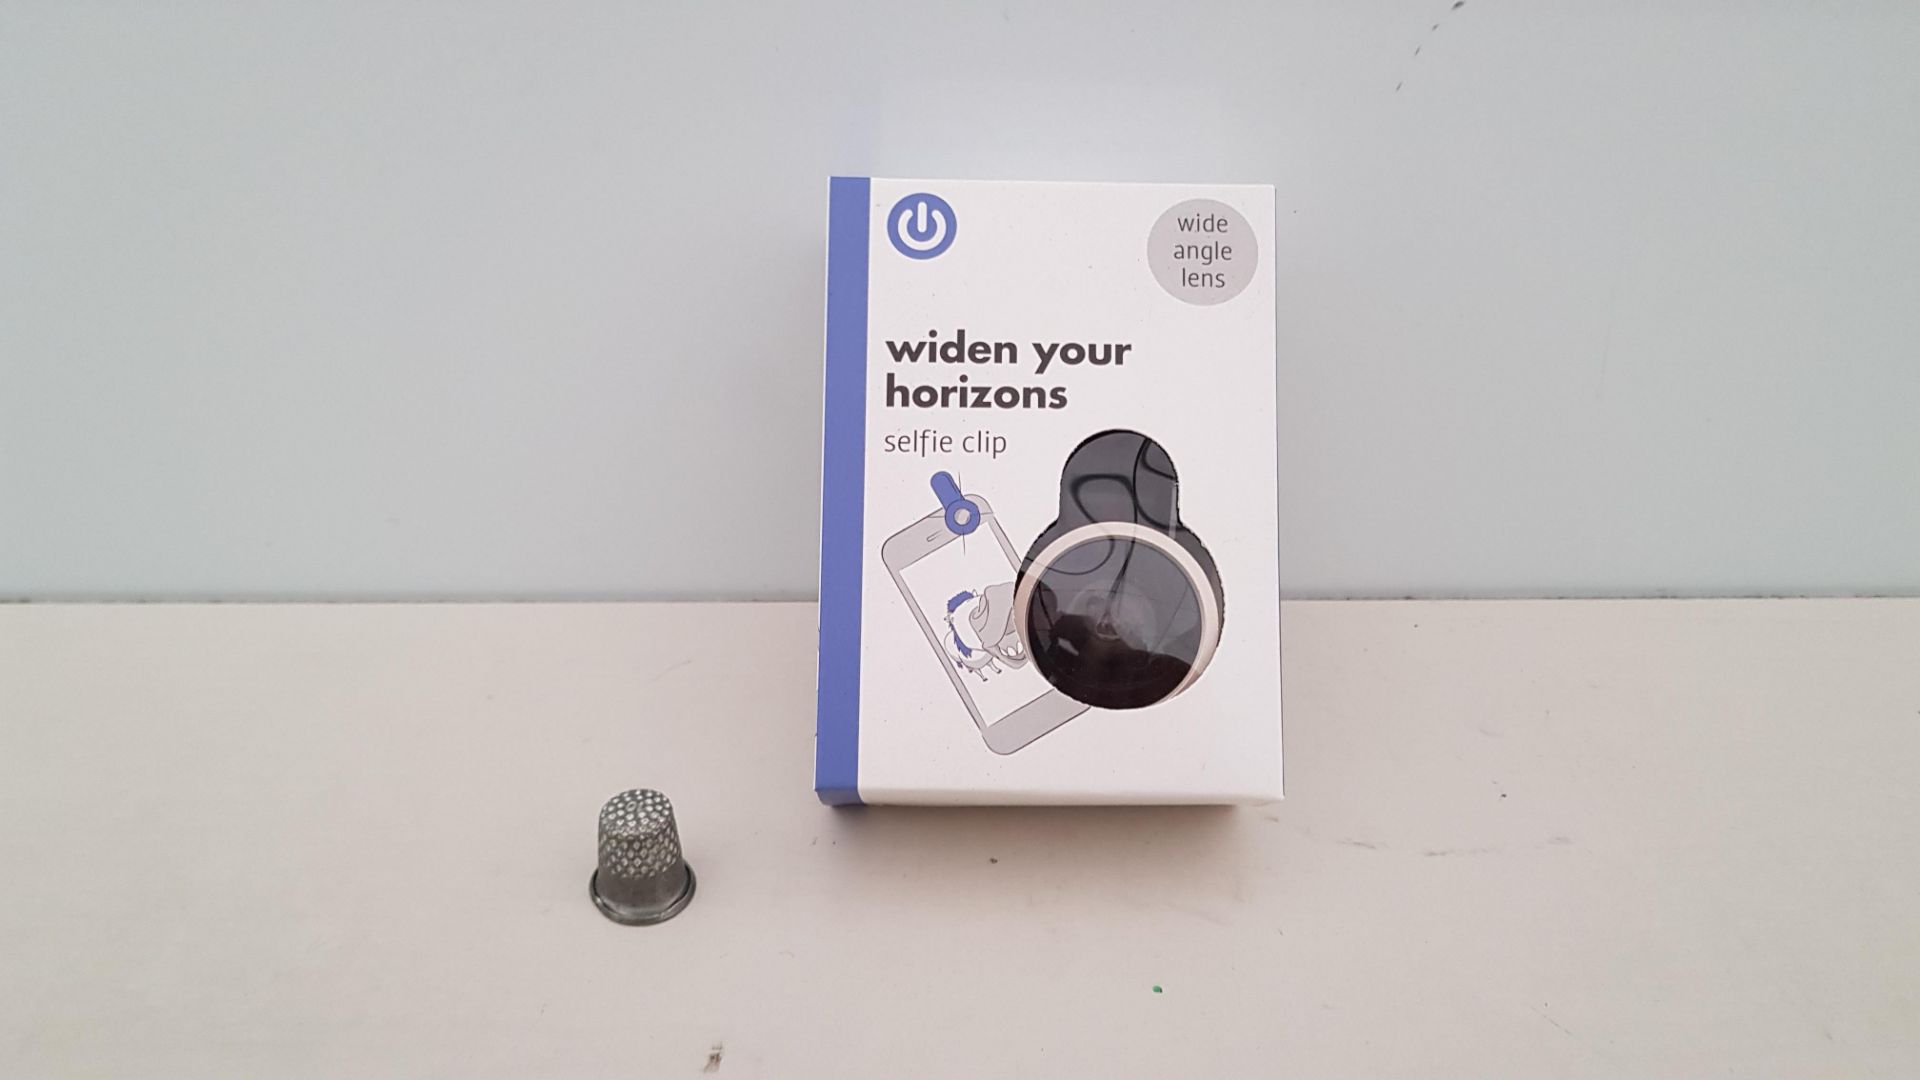 480 X BRAND NEW BOXED WIDEN YOUR HORIZONS SELFIE CLIP CAM LENS (WIDE ANGLED LENS) - IN 15 BOXES